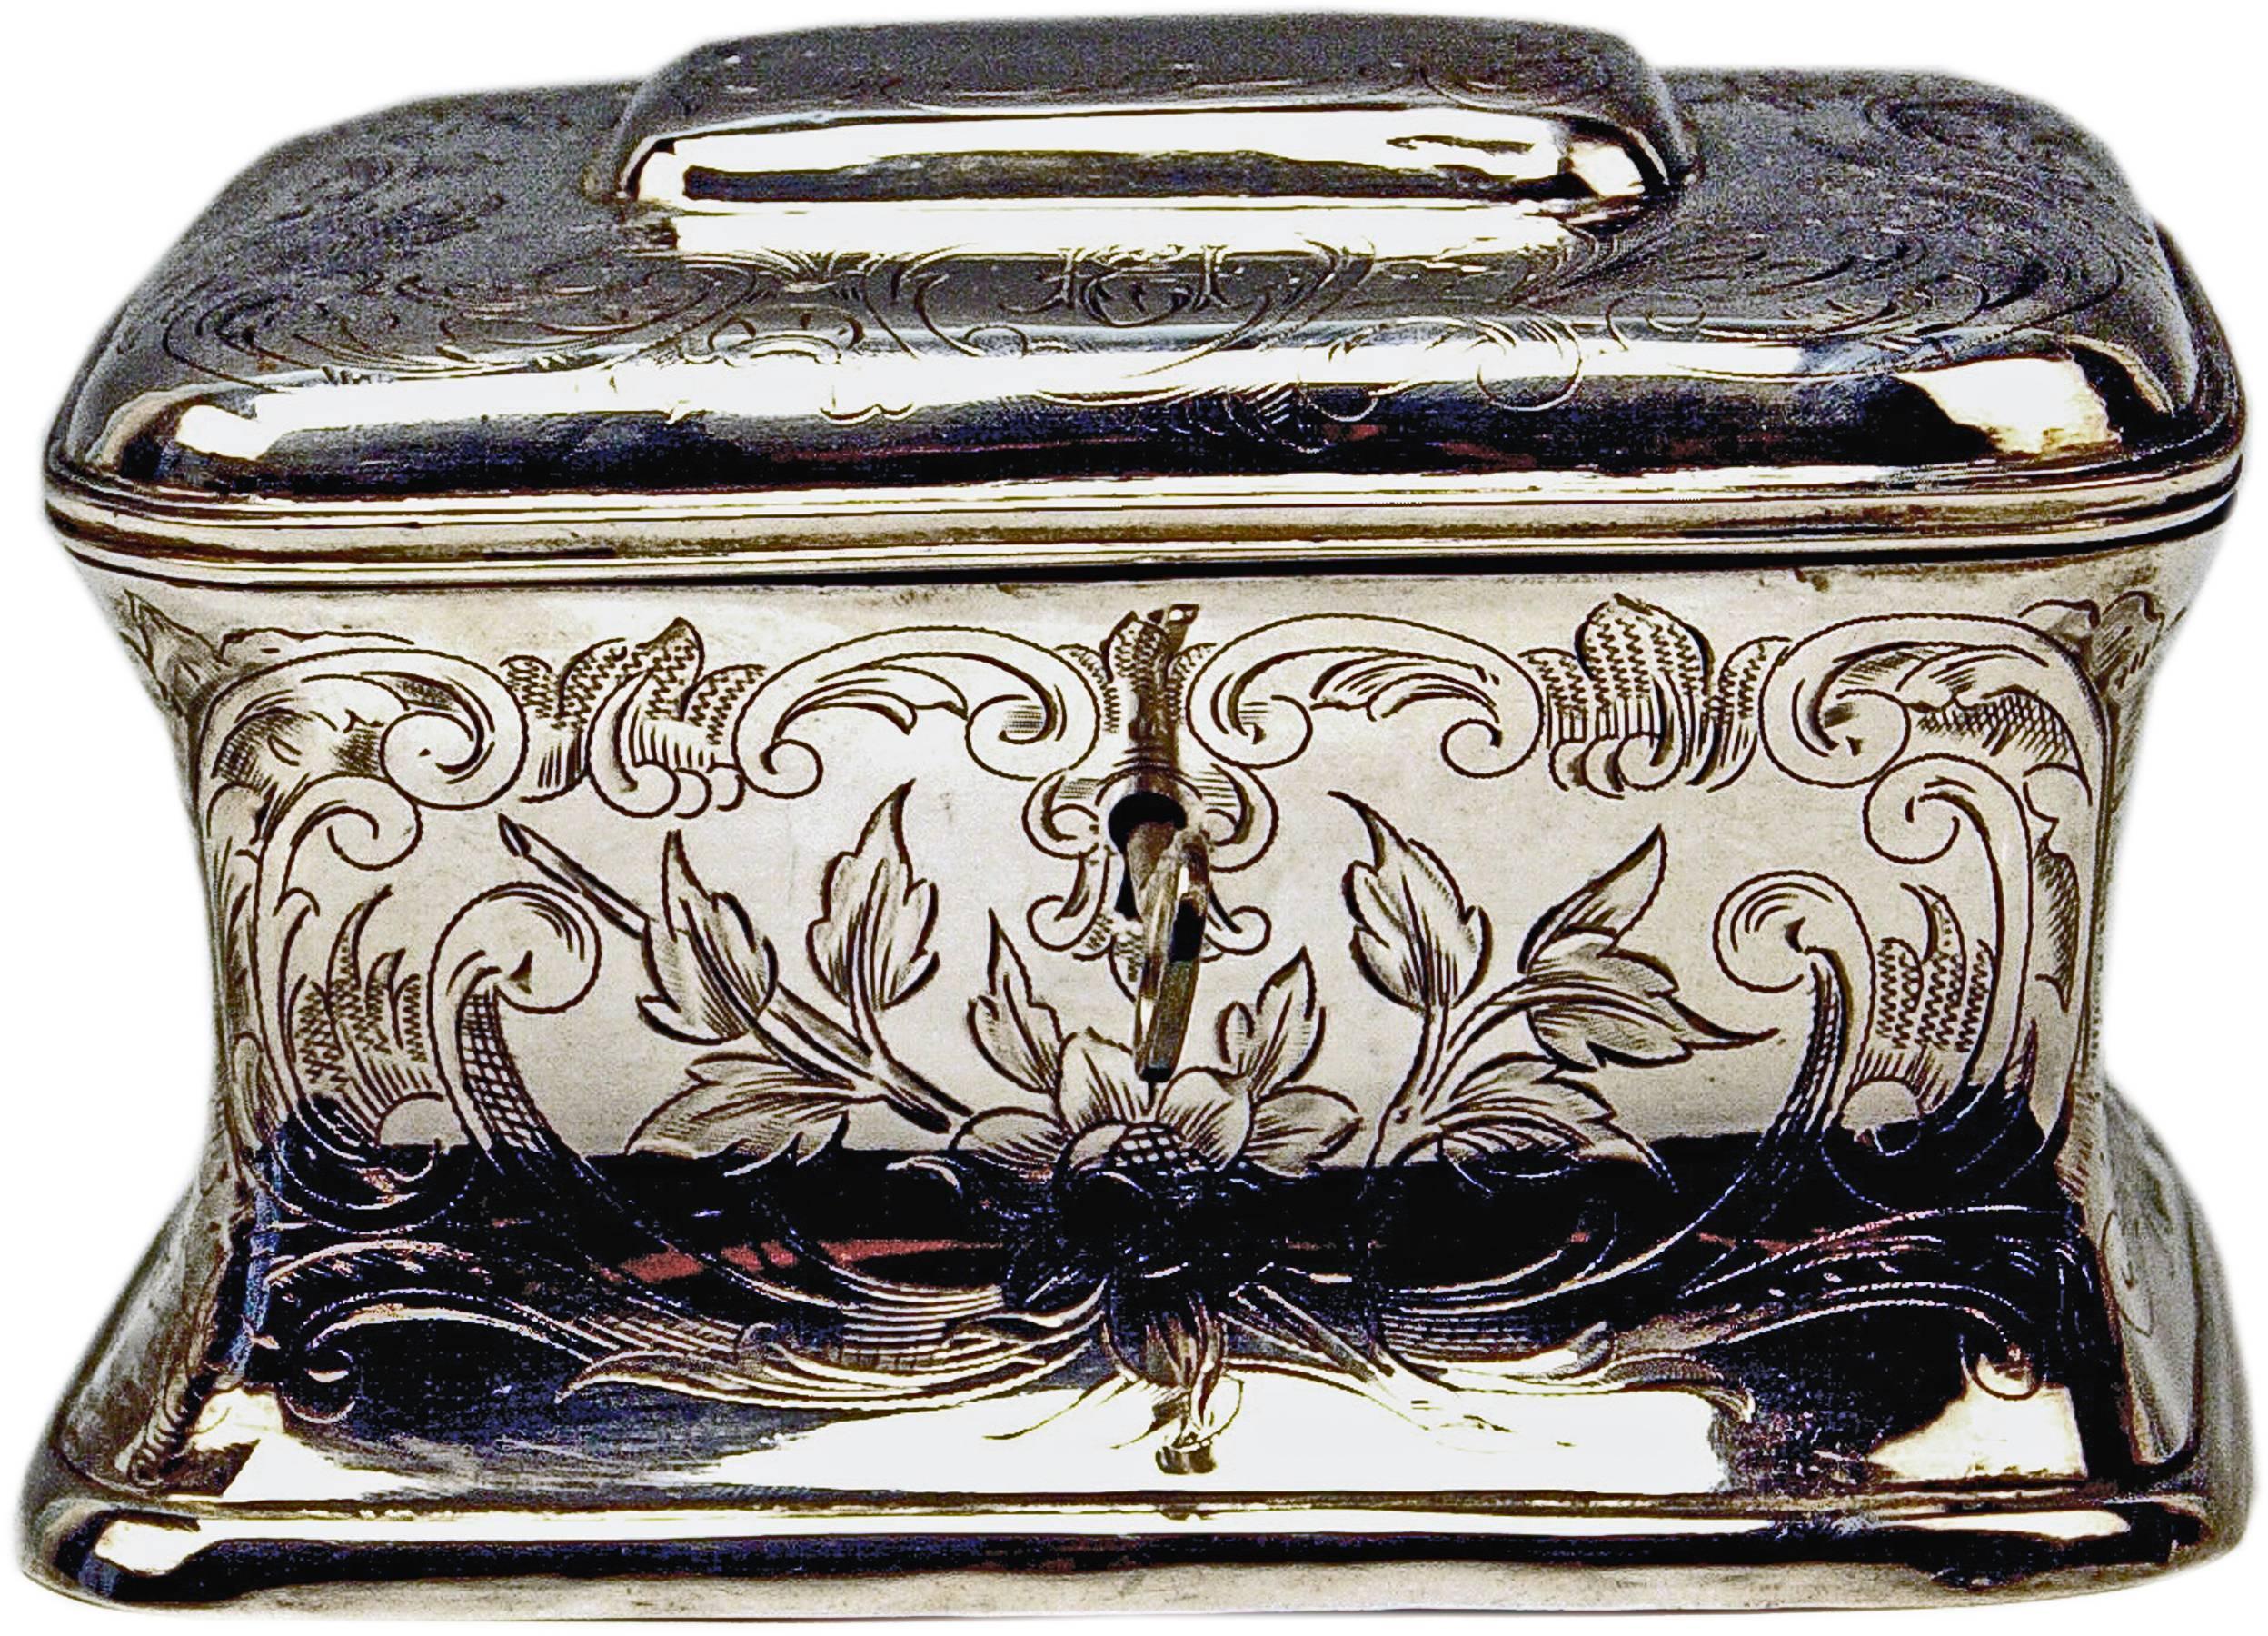 Austrian silver excellent sugar box.
Manufactured during turn of century (made, circa 1900).

It is a stunning Viennese sugar box shaped as chest having tapering walls as well as rounded edges. The box has to be closed by slightly domed lid: